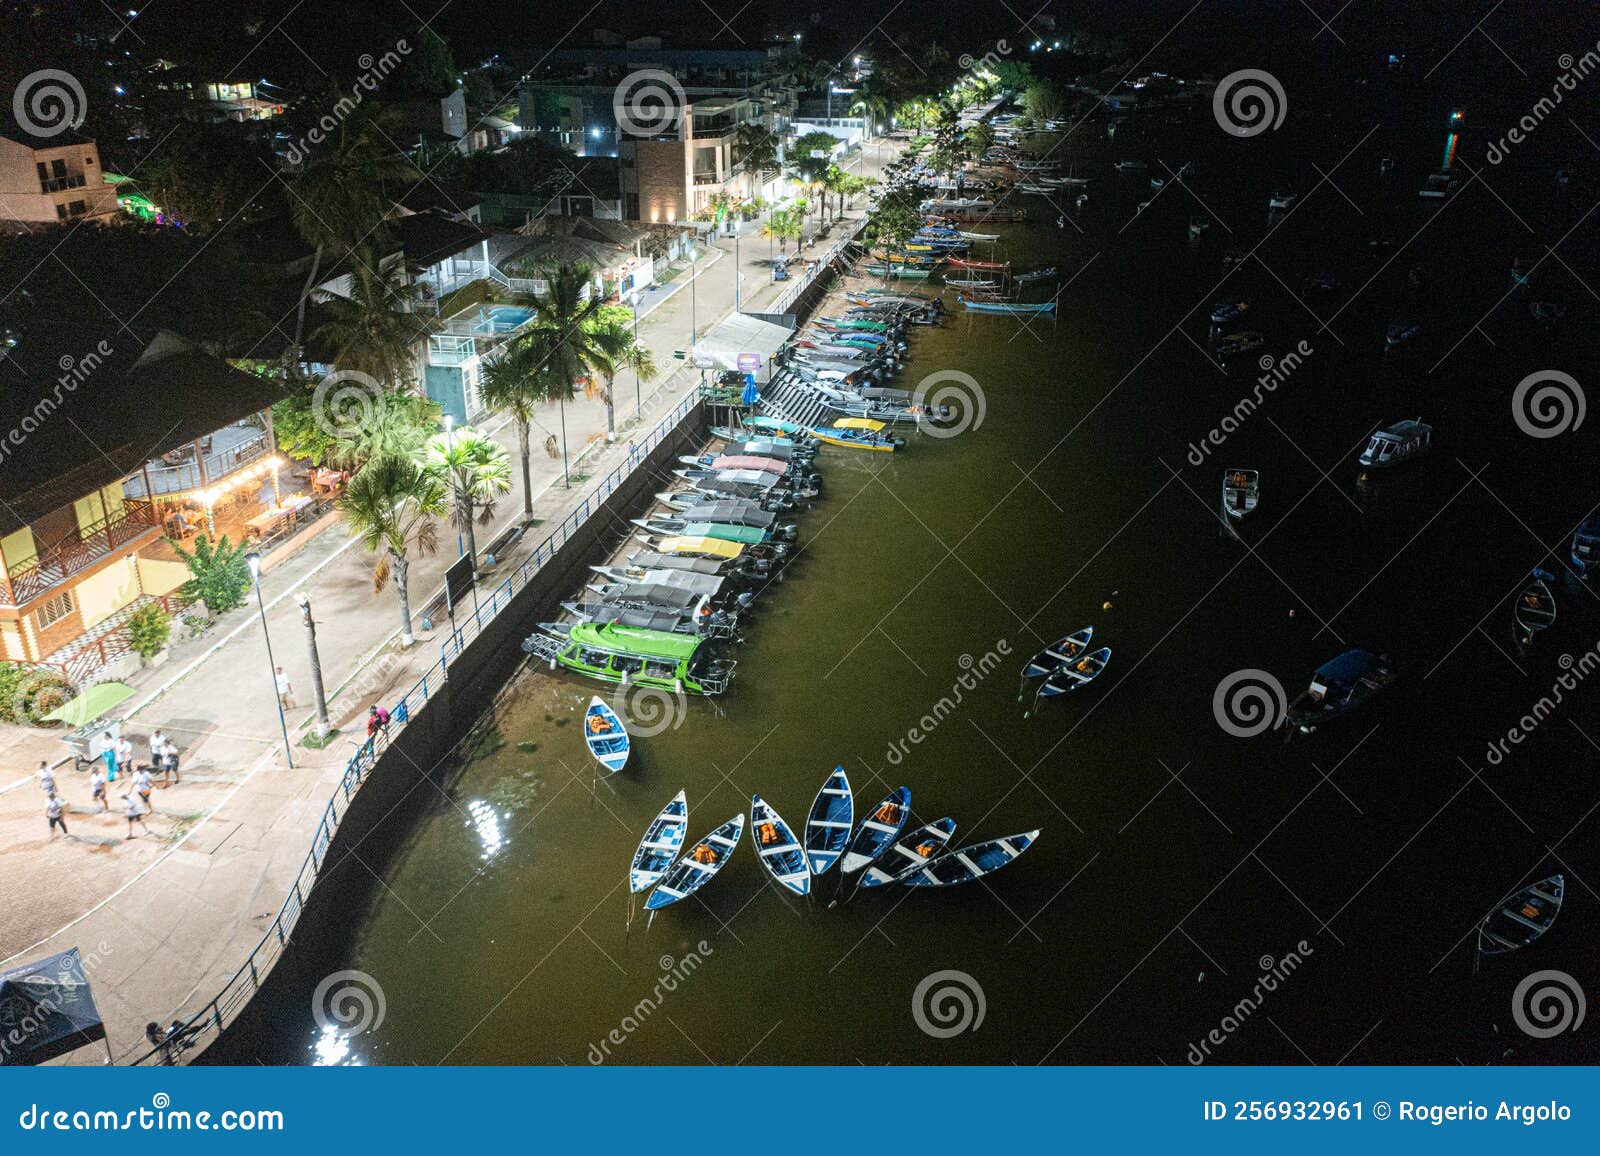 night aerial photo of the waterfront of the city of alter do chÃÂ£o on the tapajÃÂ³s river, parÃÂ¡, brazil.